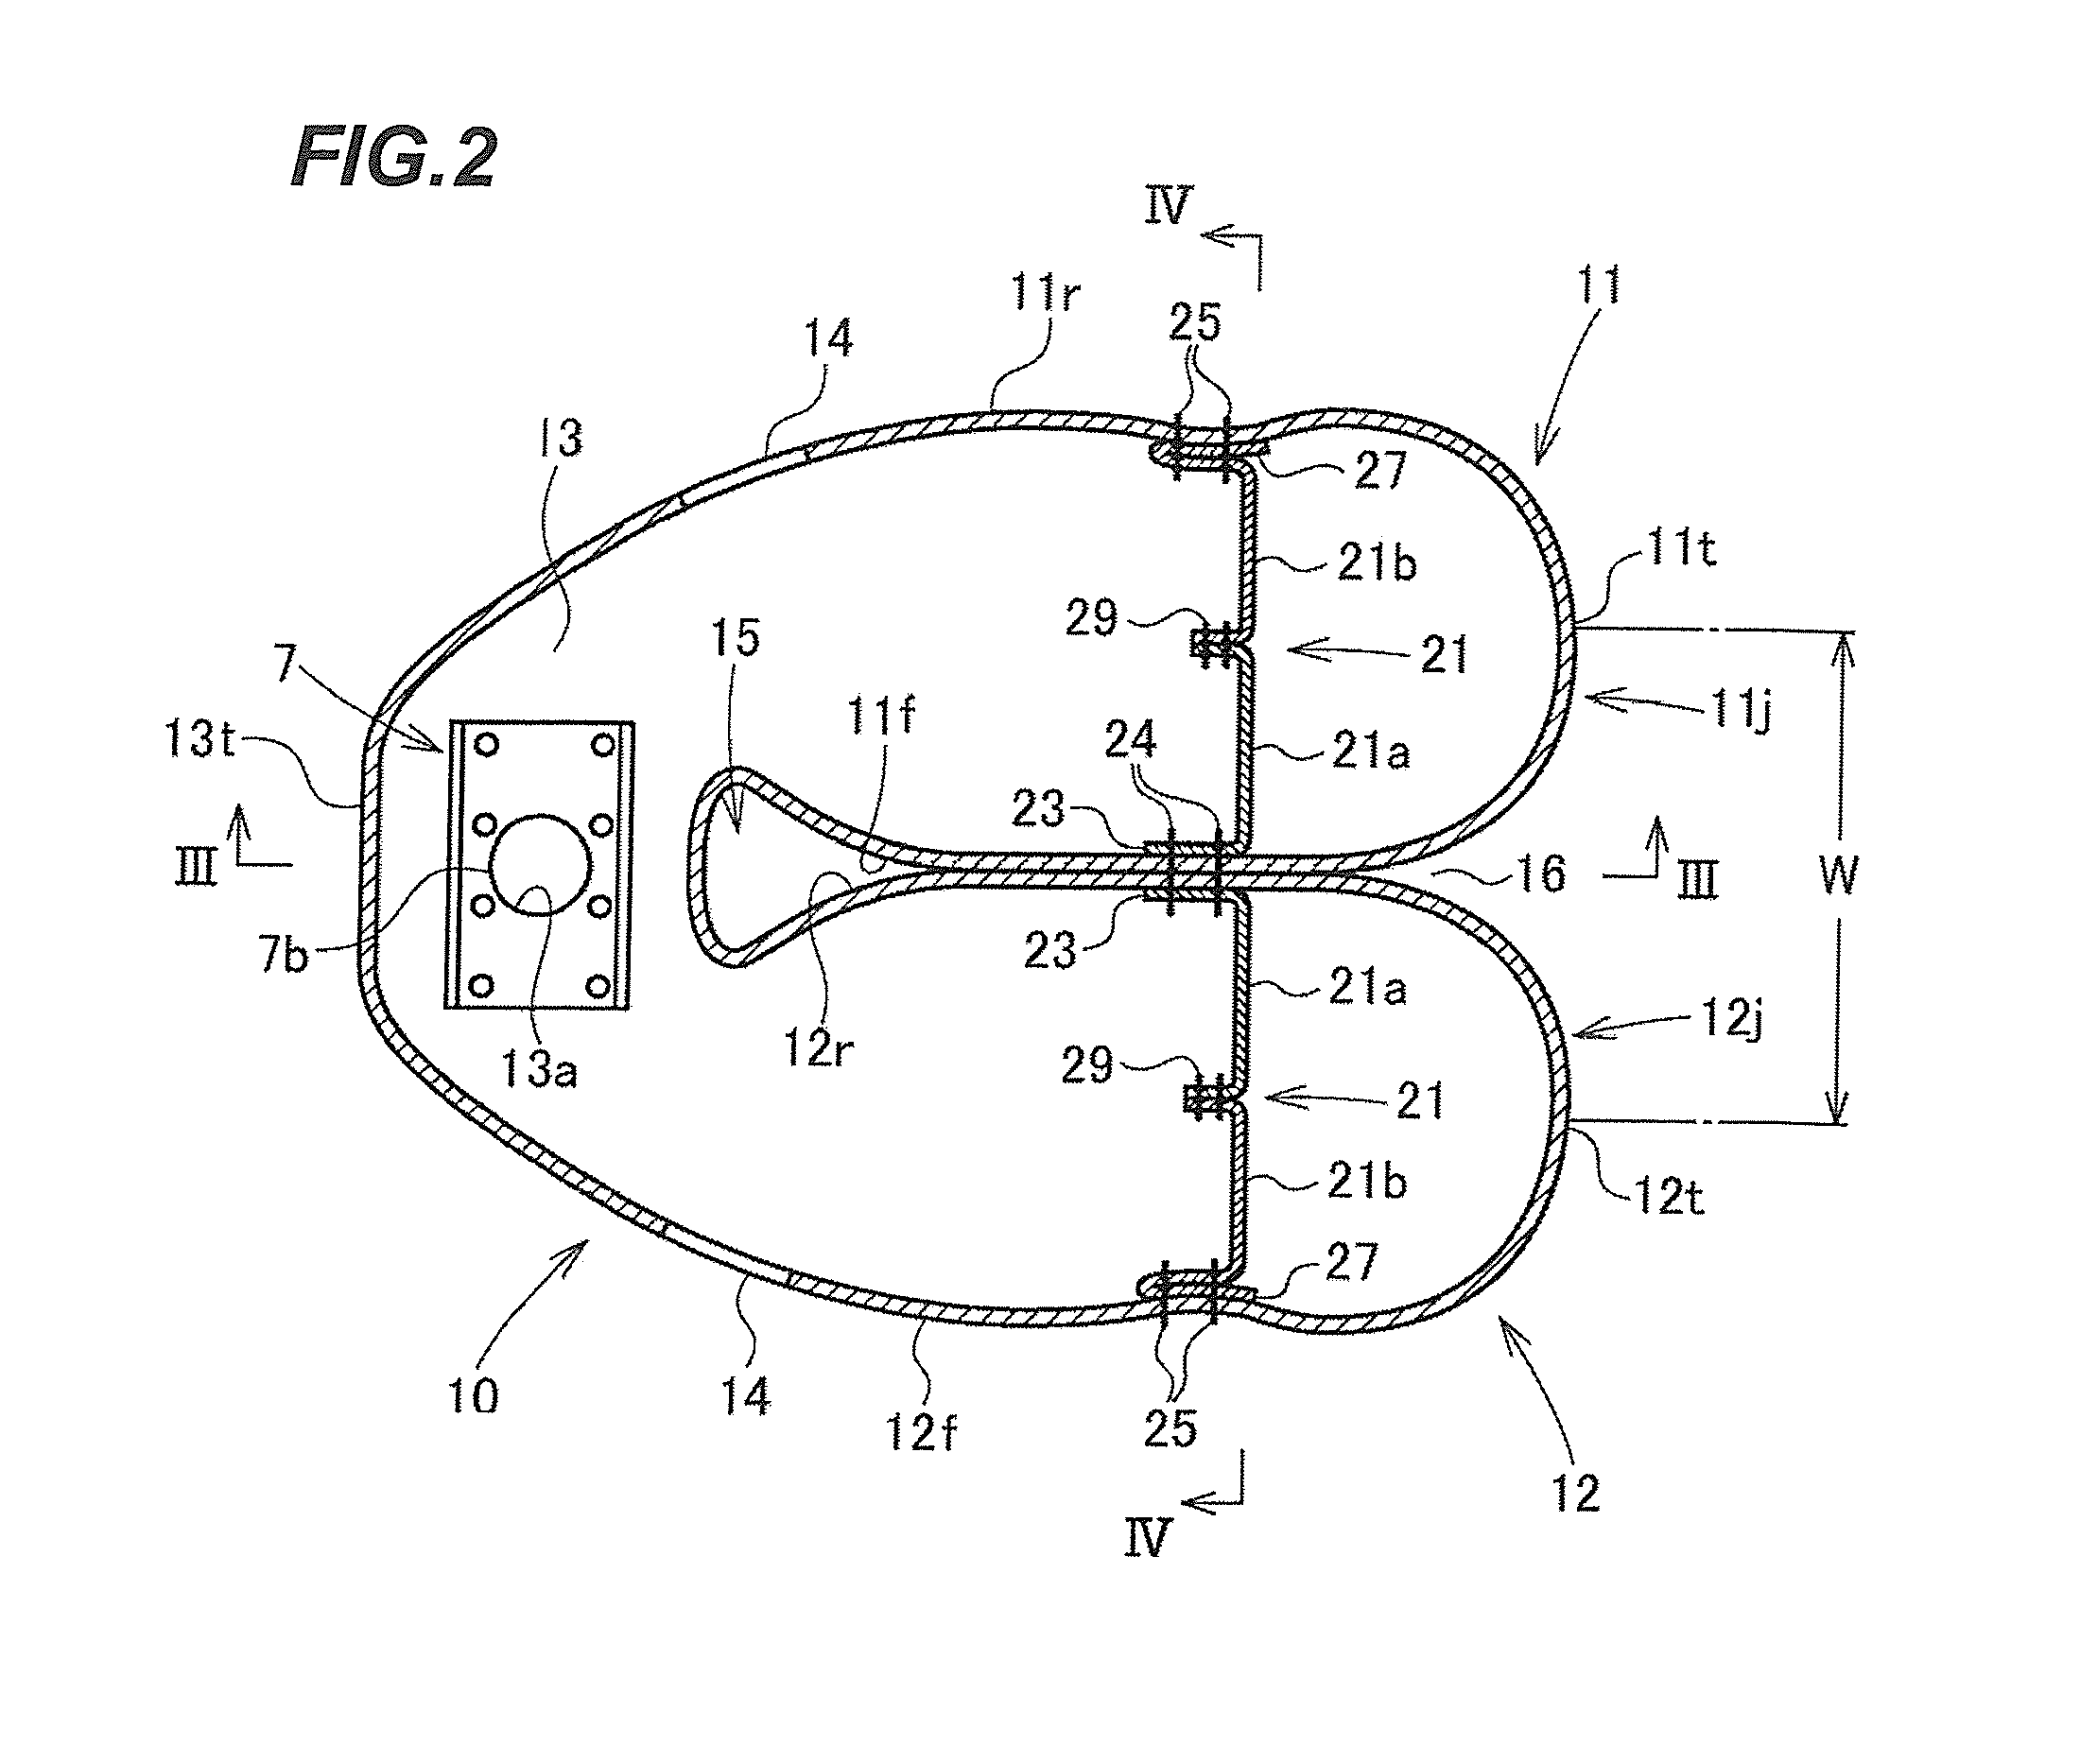 Passenger-side airbag folded body and passenger-side airbag apparatus